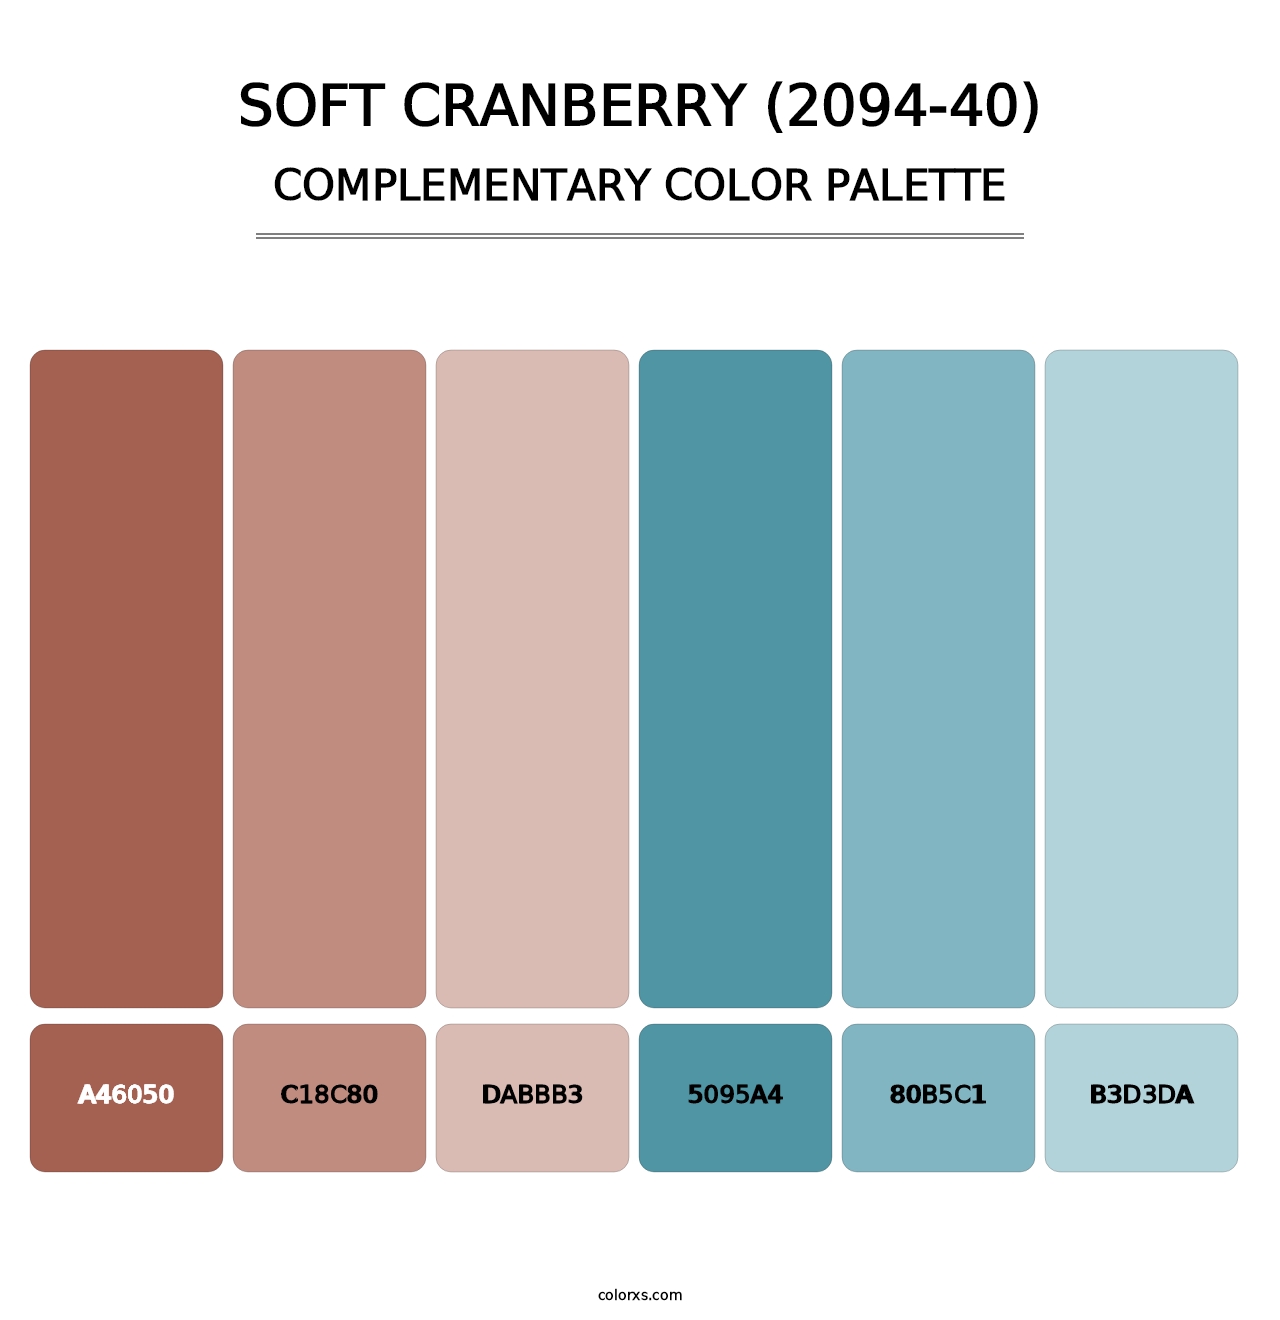 Soft Cranberry (2094-40) - Complementary Color Palette